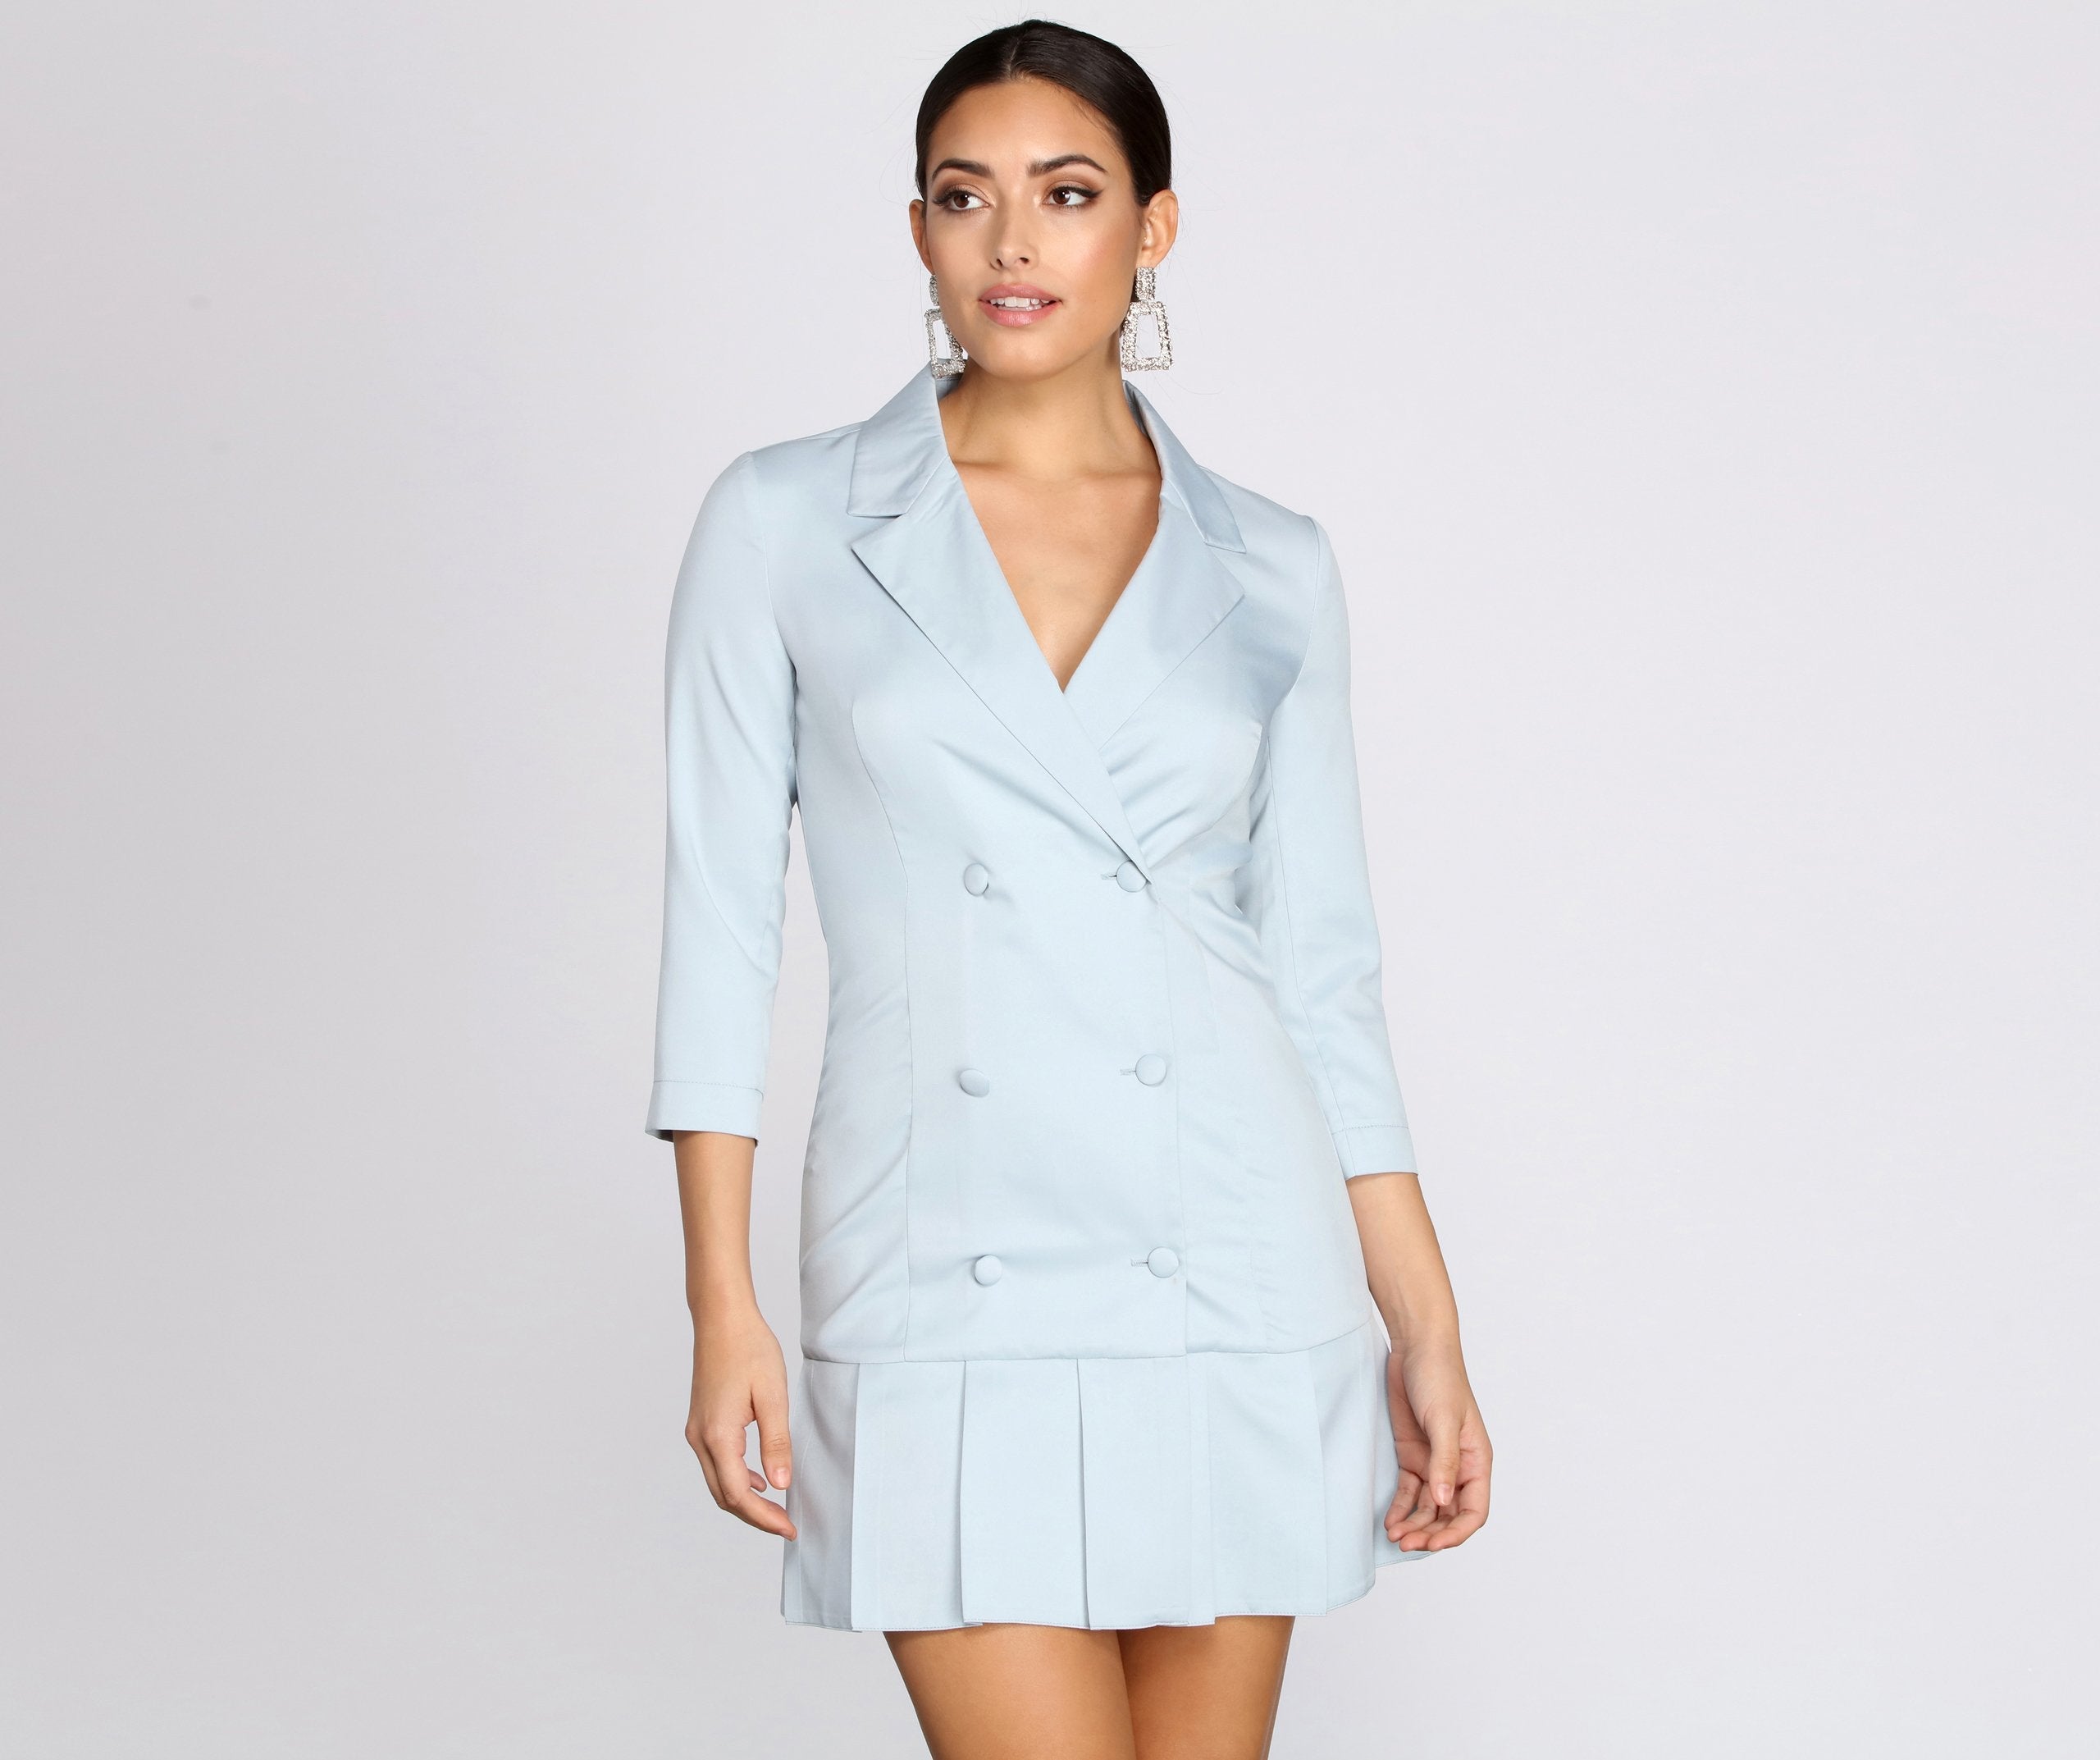 Back To Business Trench Dress - Lady Occasions